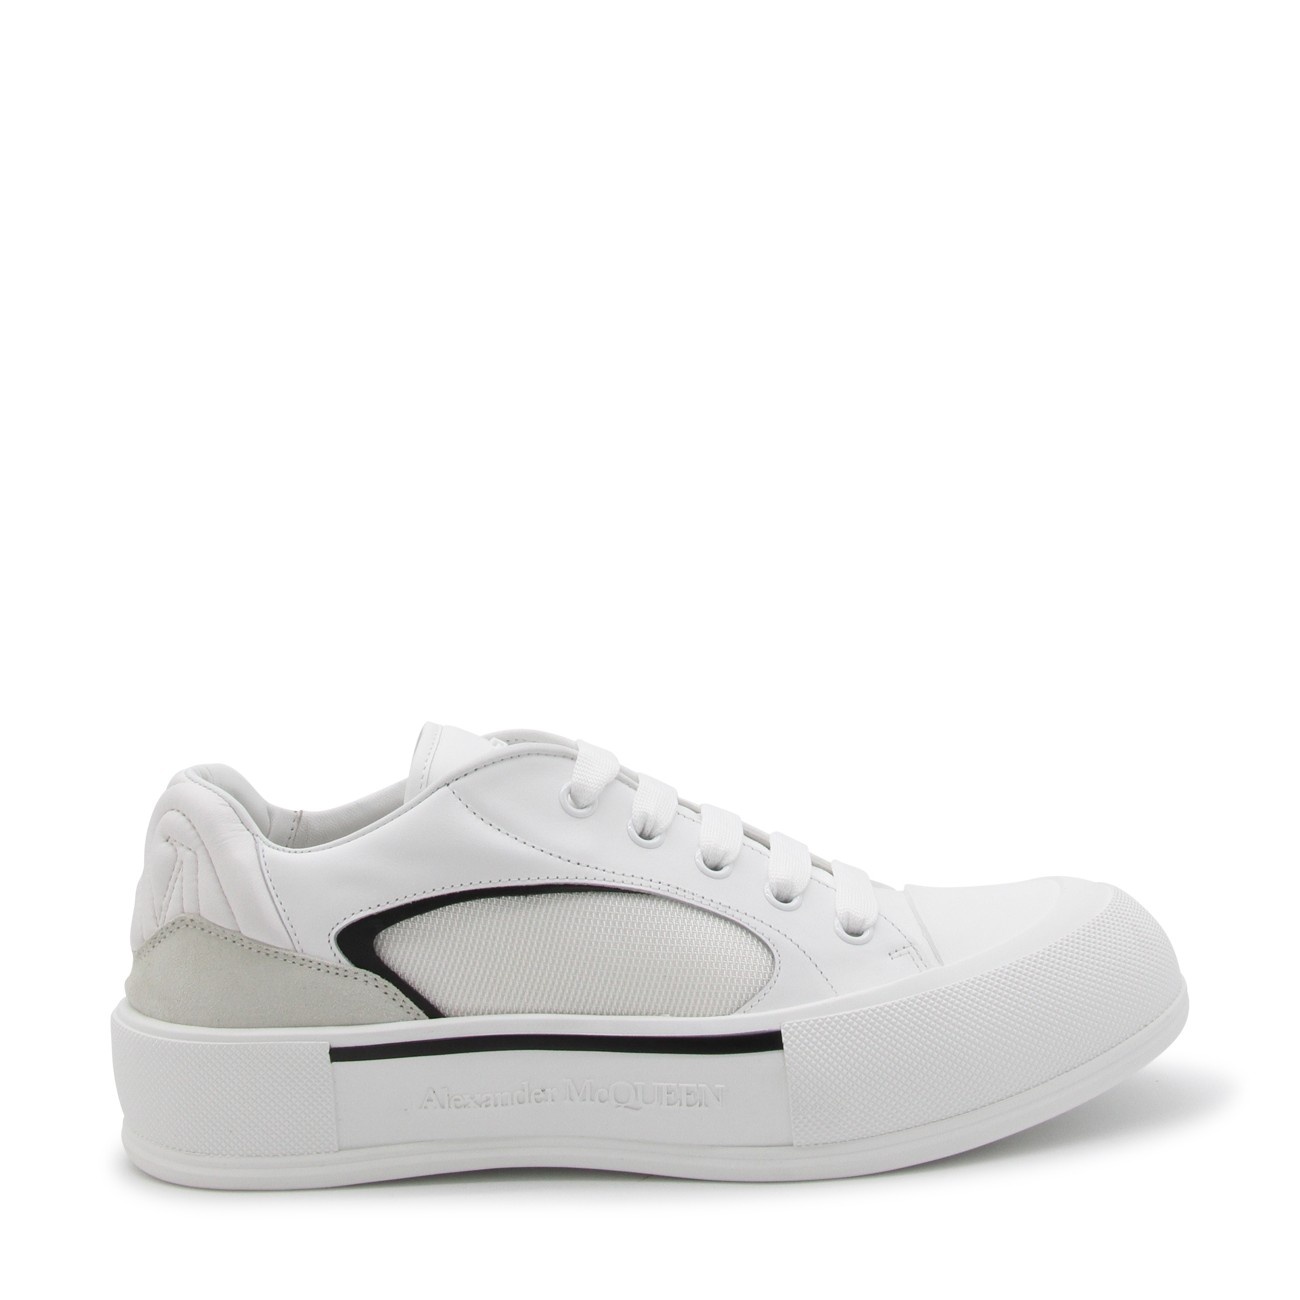 white leather plimsoll sneakers - 1